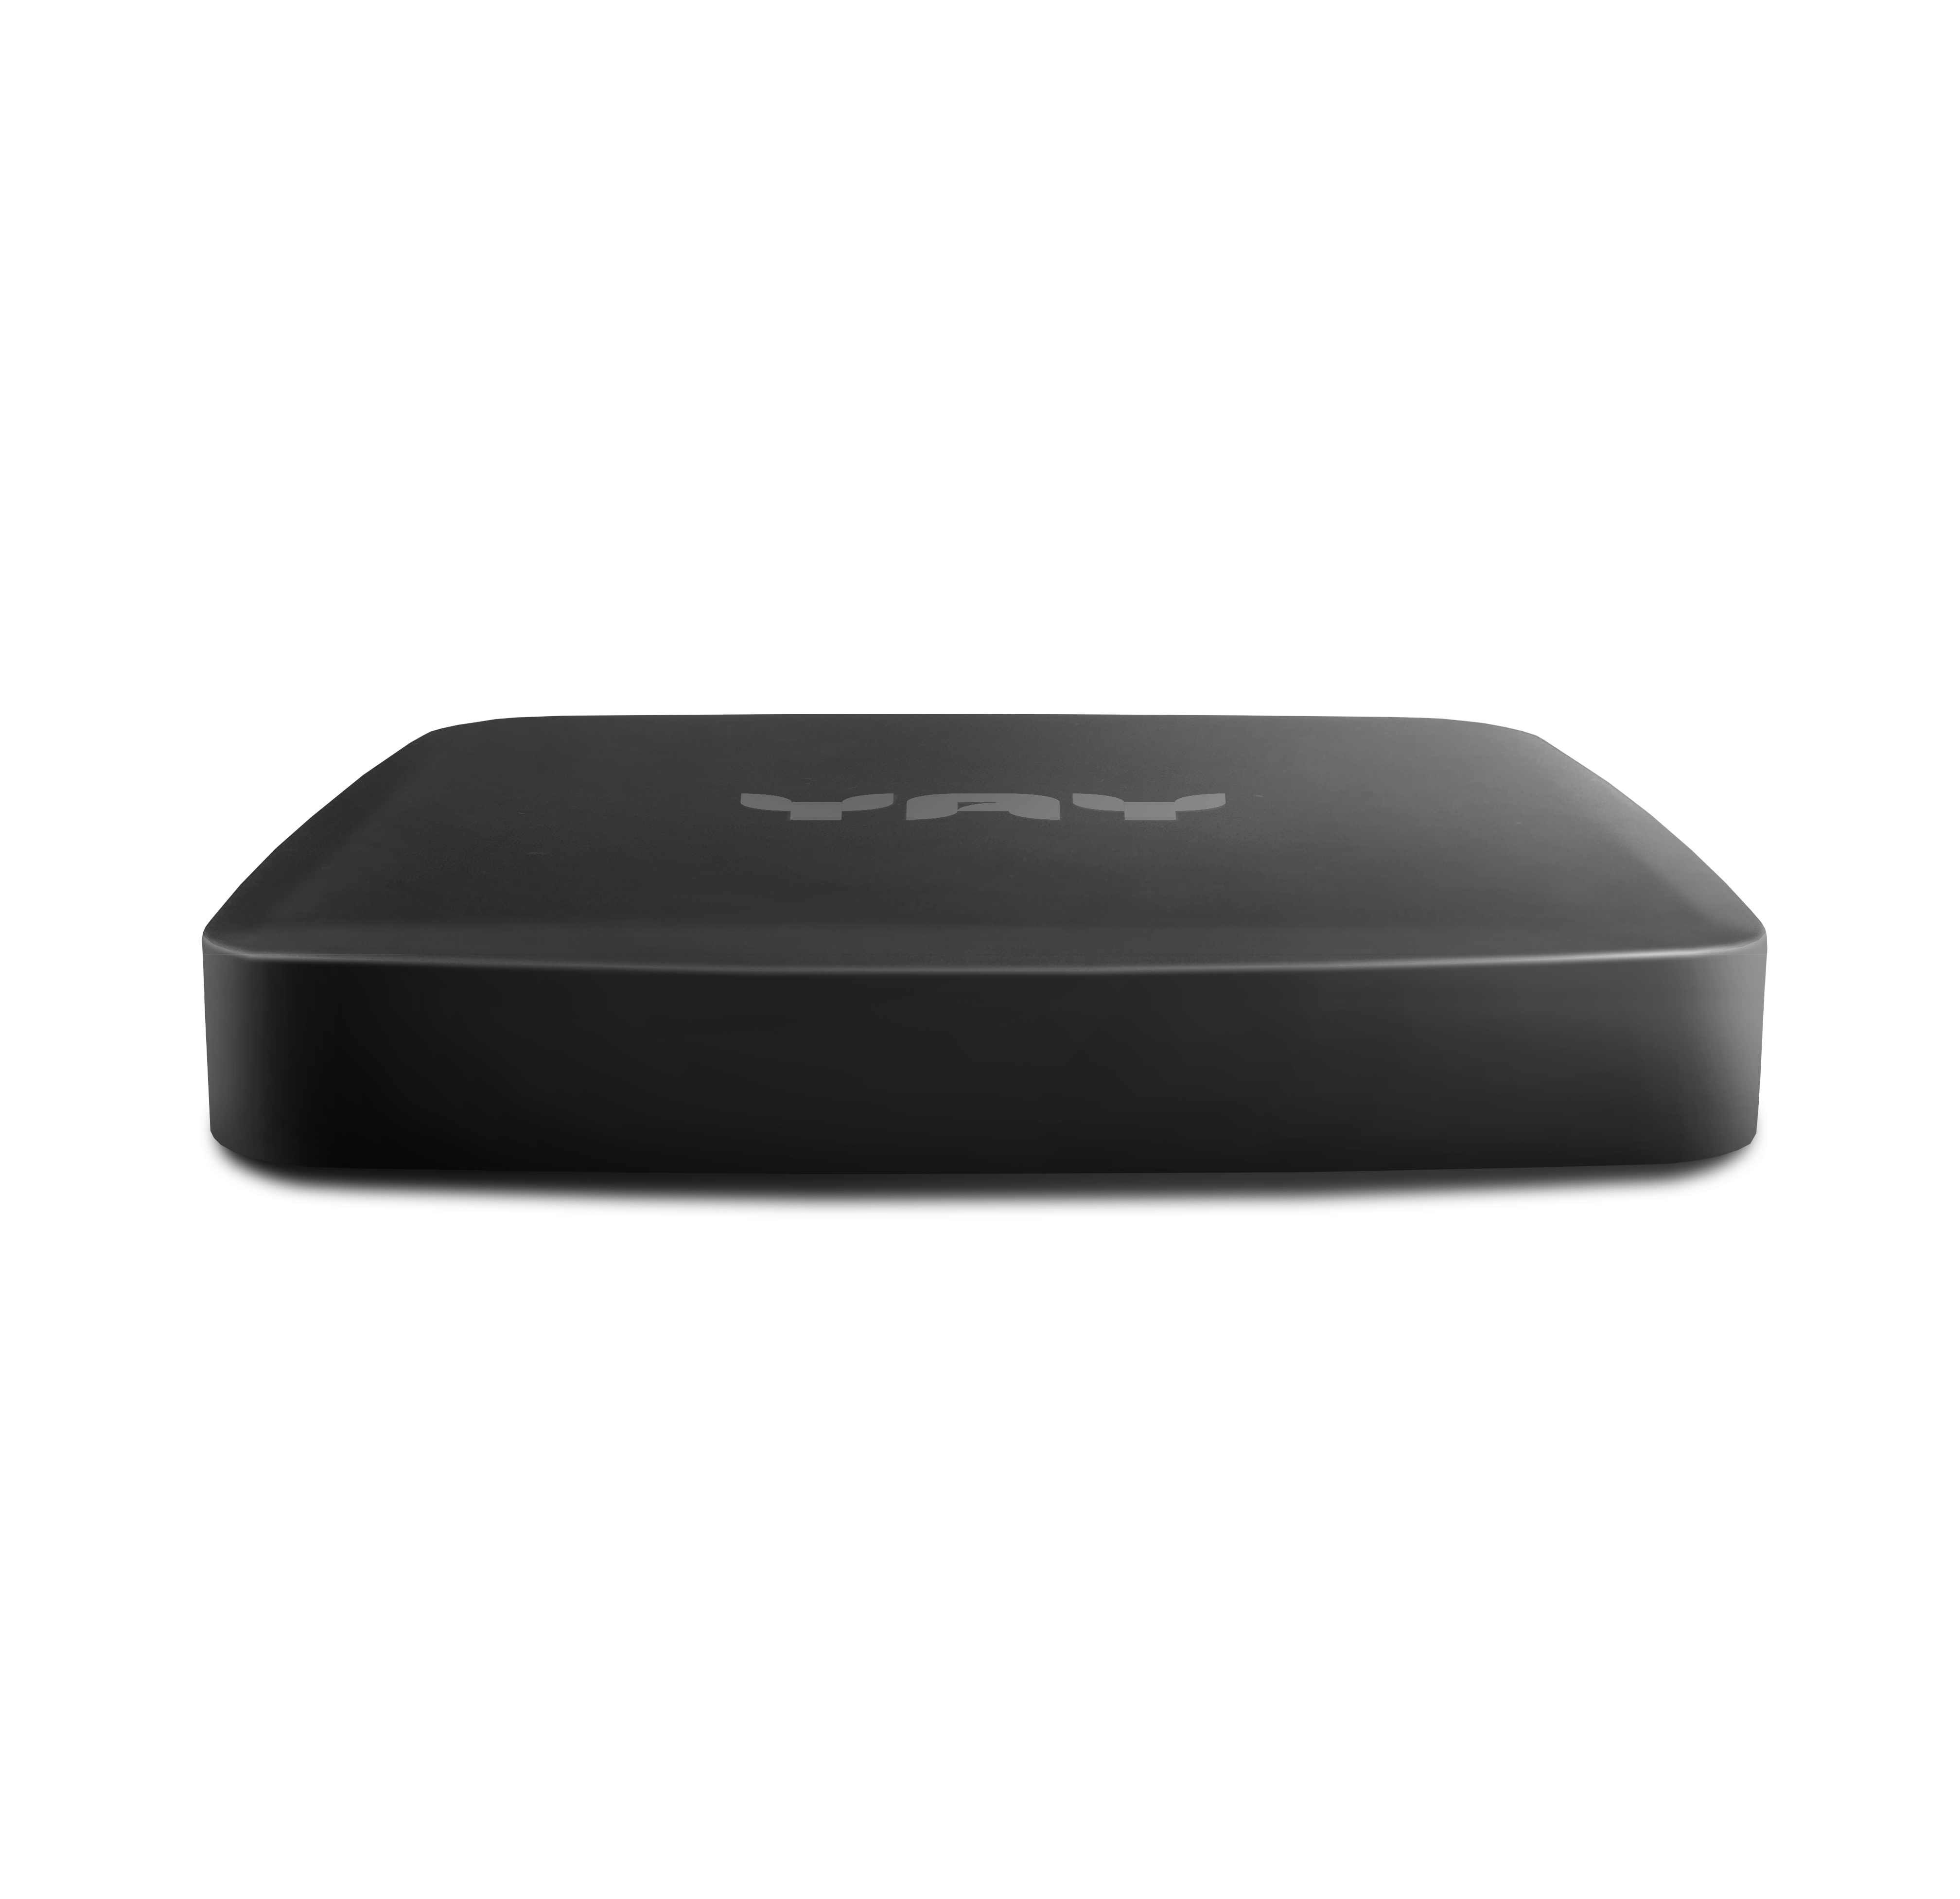 YAY GO Android TV HIGH-END 4K UHD Streaming Box Android 10.0 und Chromecast integriert